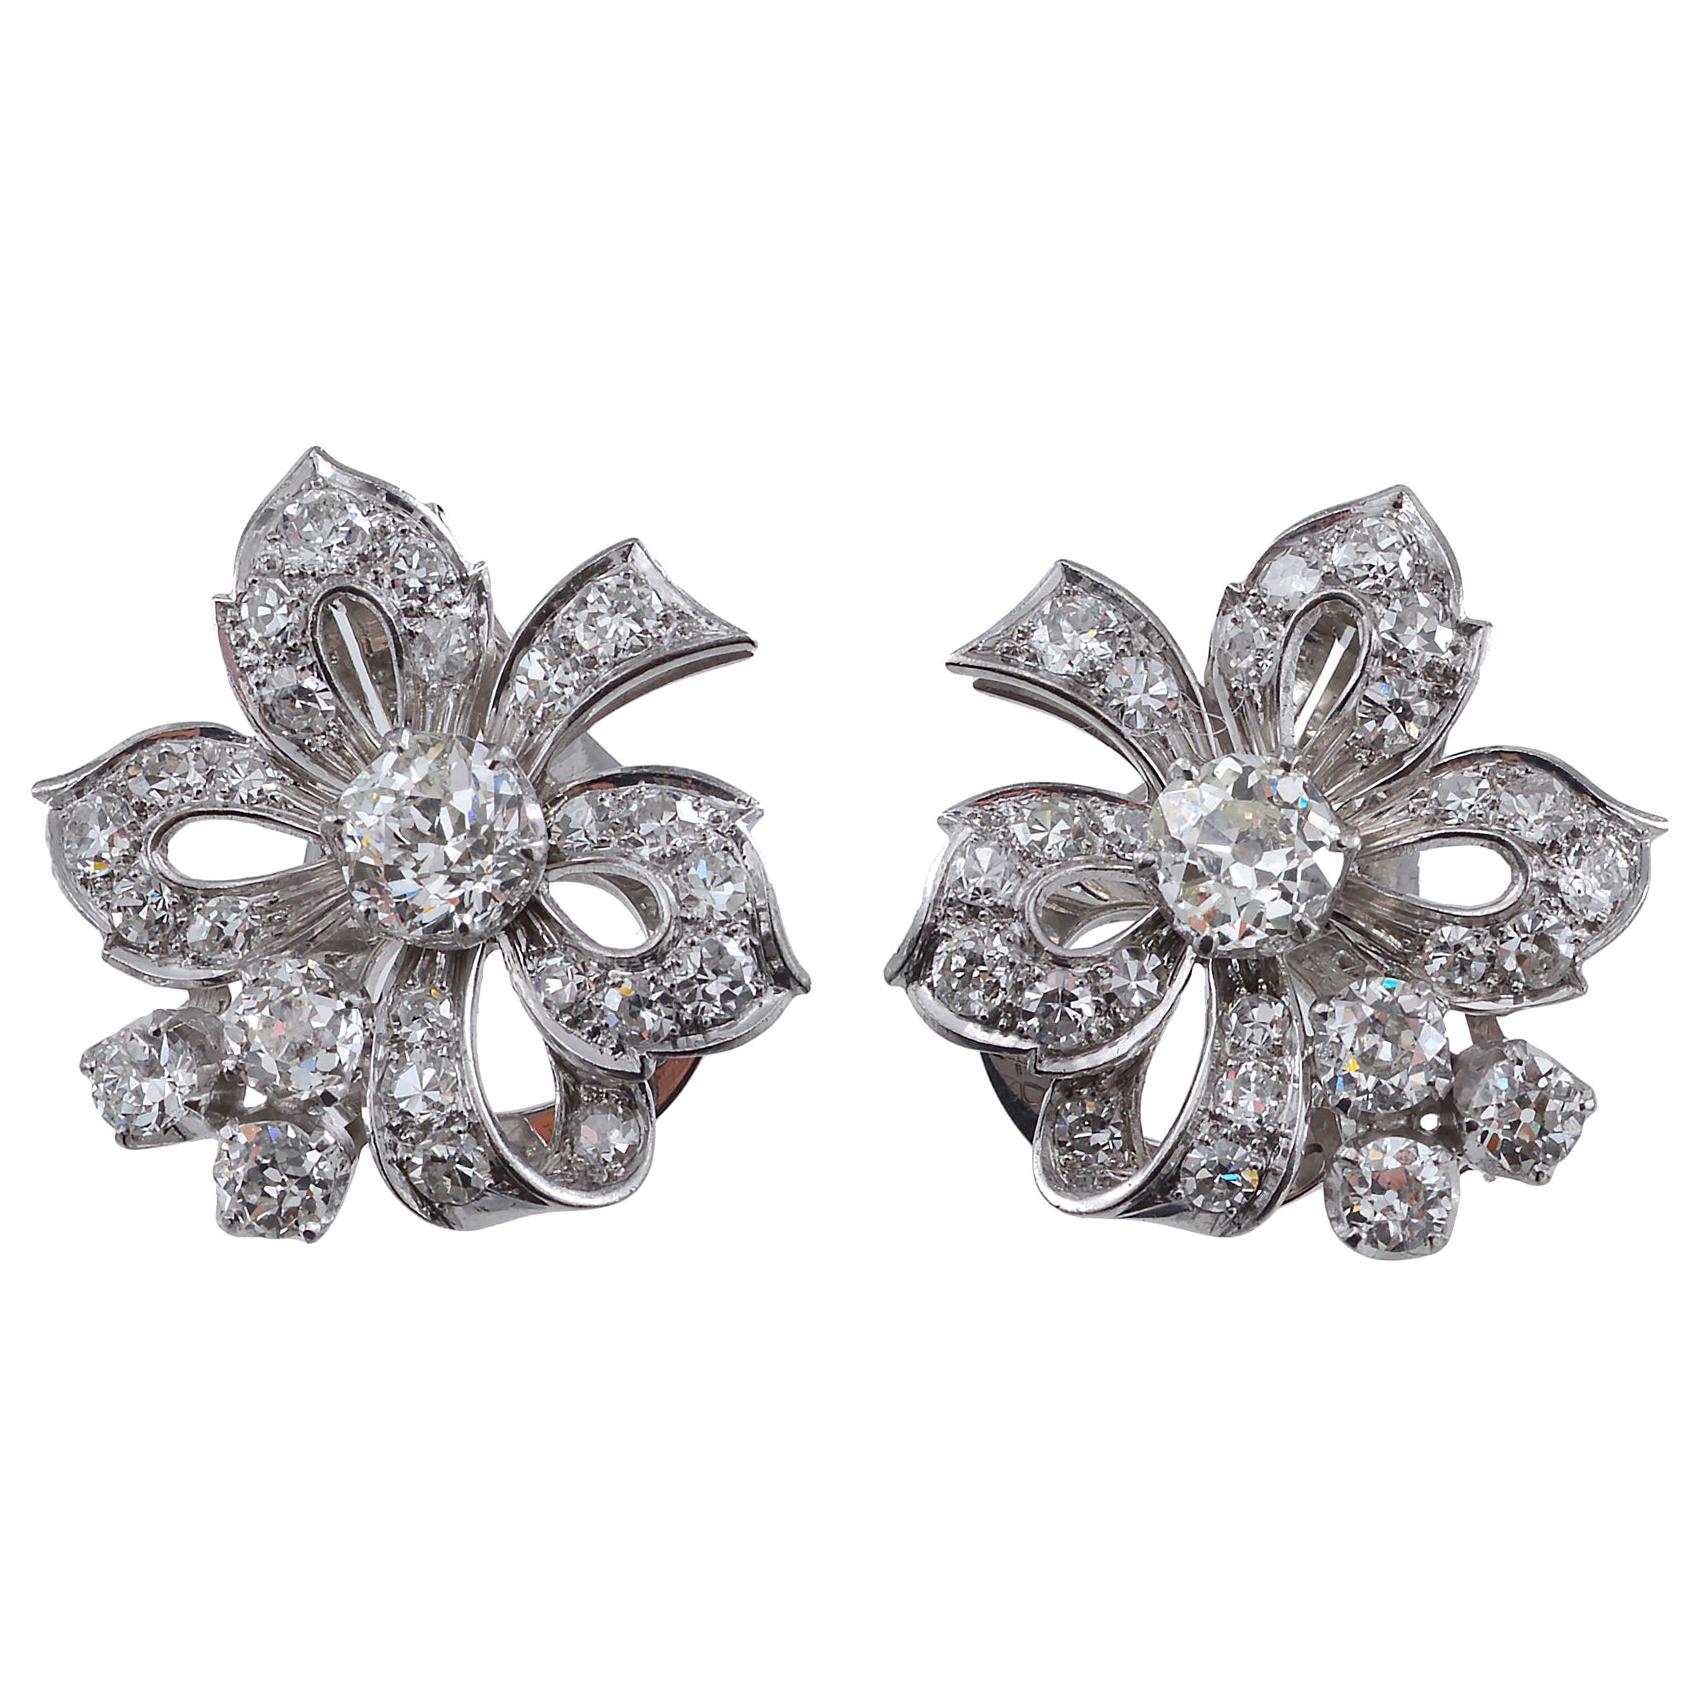 Diamond Earrings Stylised as Tied Bows, circa 1950 For Sale